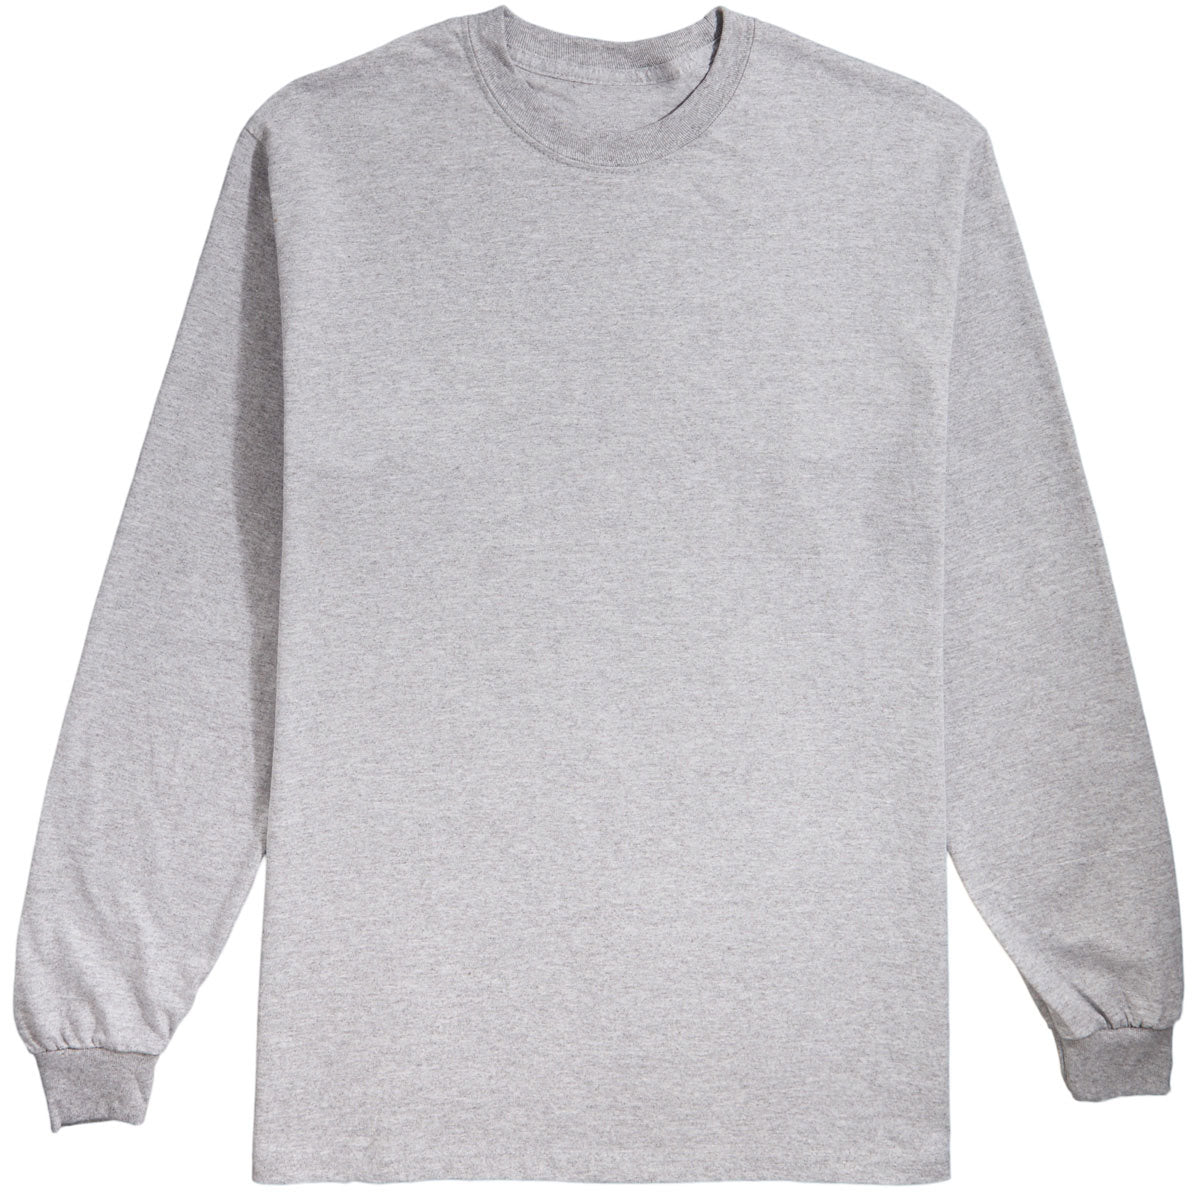 Converse Mouse Long Sleeve T-Shirt - Heather Grey - SM image 1